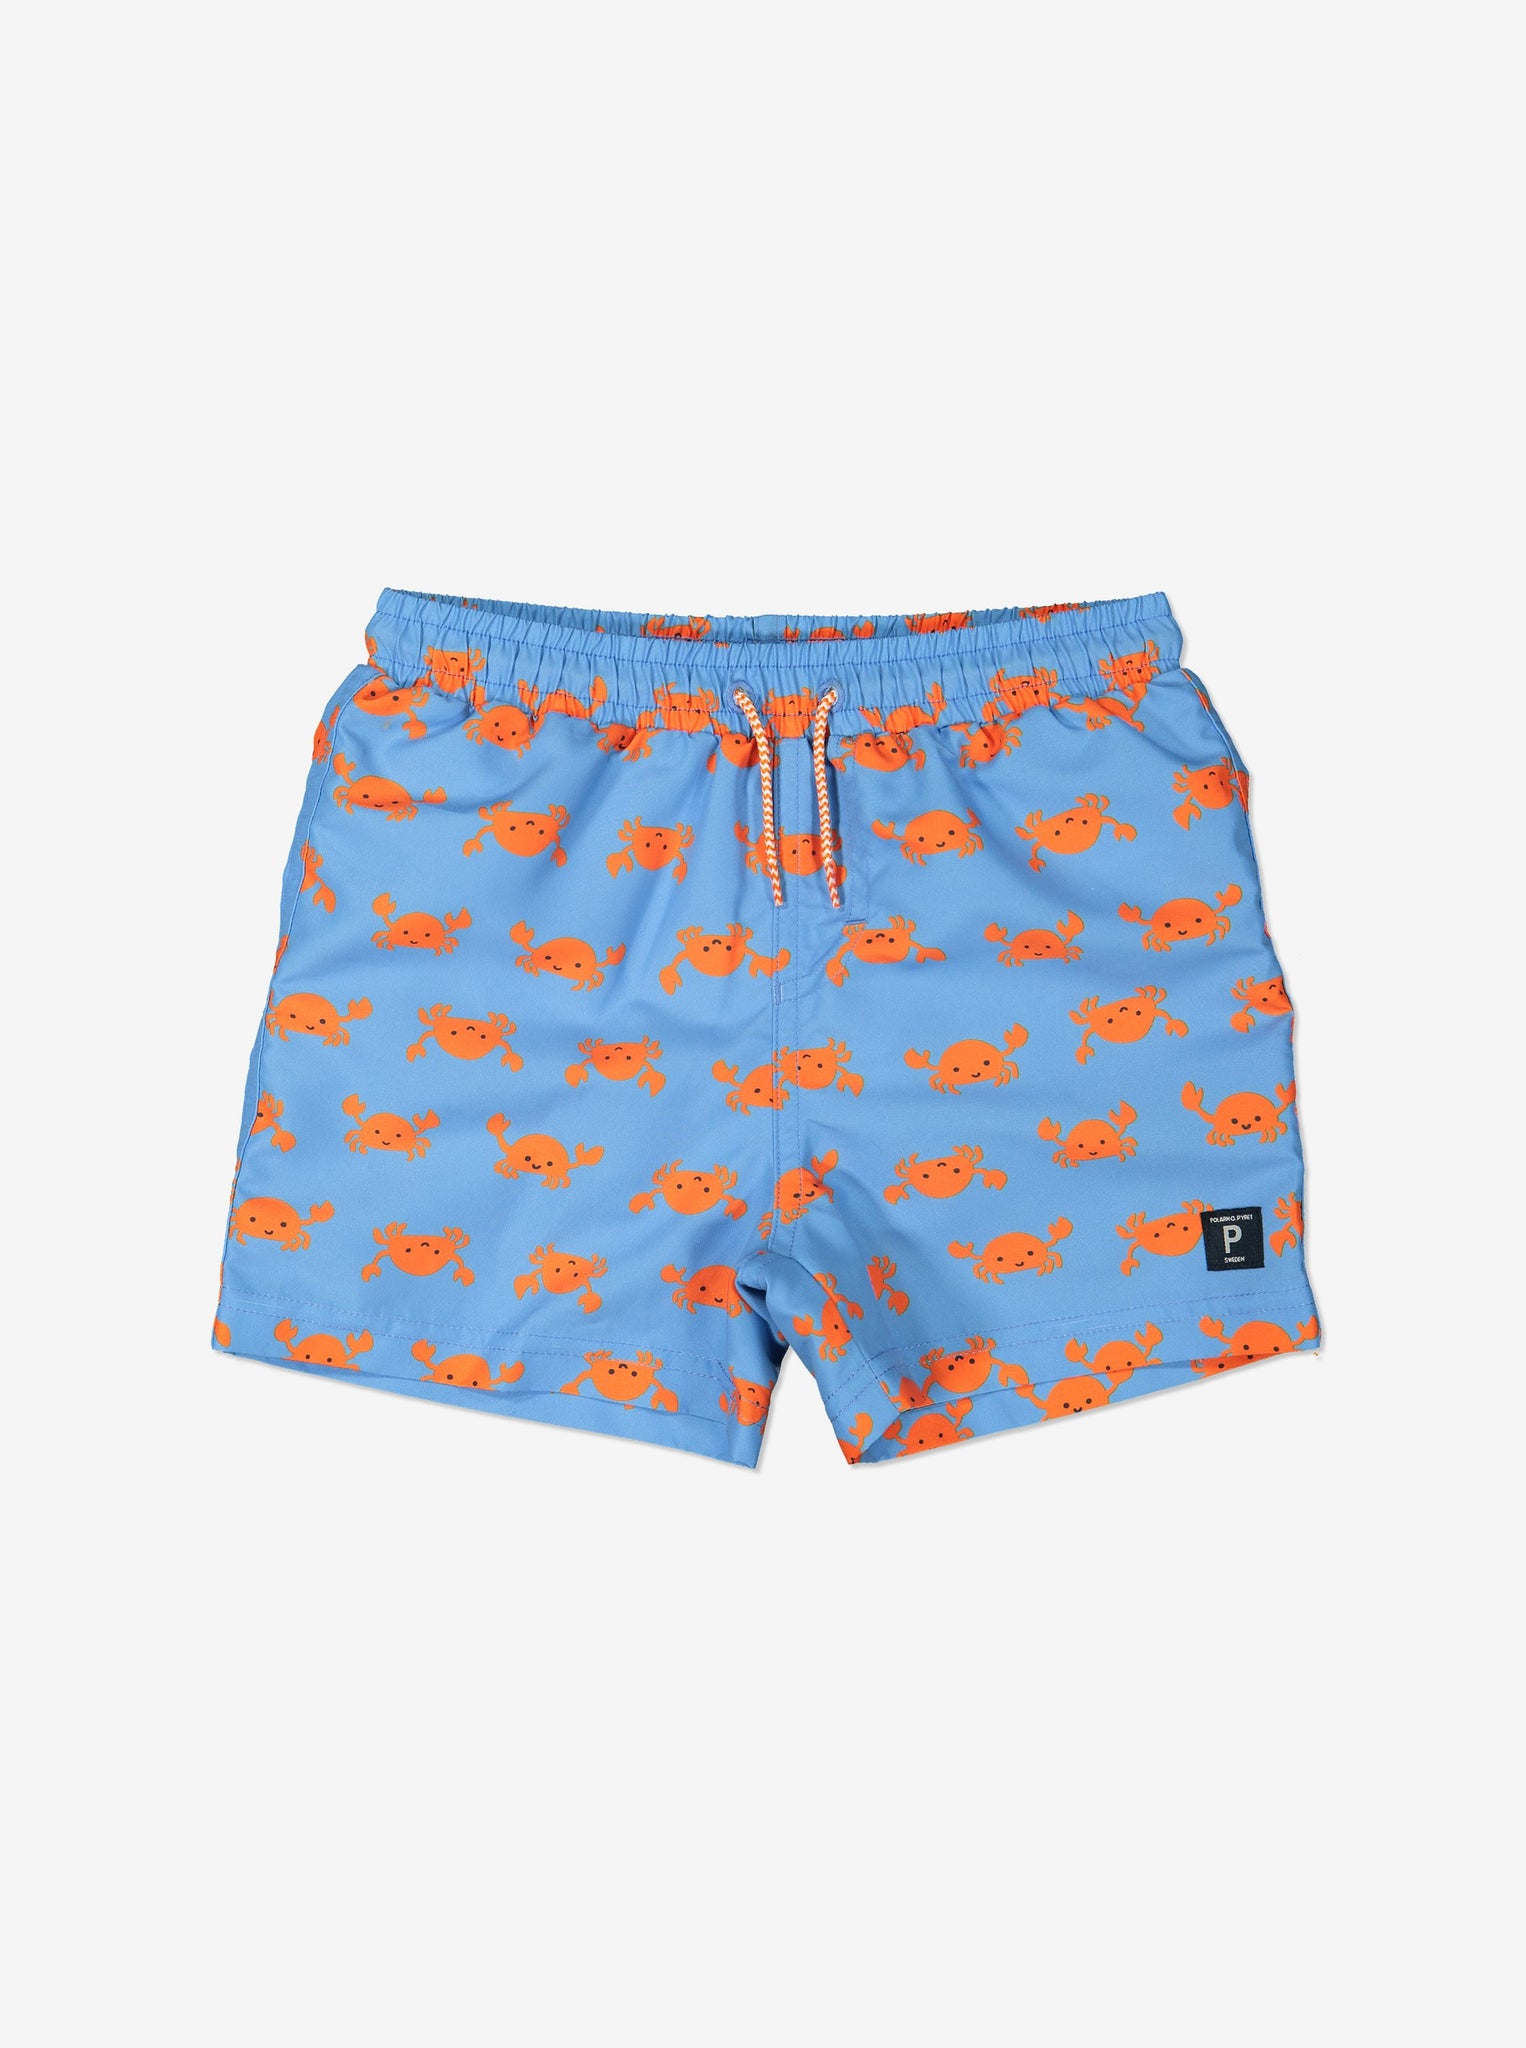 Blue kids swim shorts printed with small orange crabs. Features an inner mesh lining and adjustable drawstring waist.